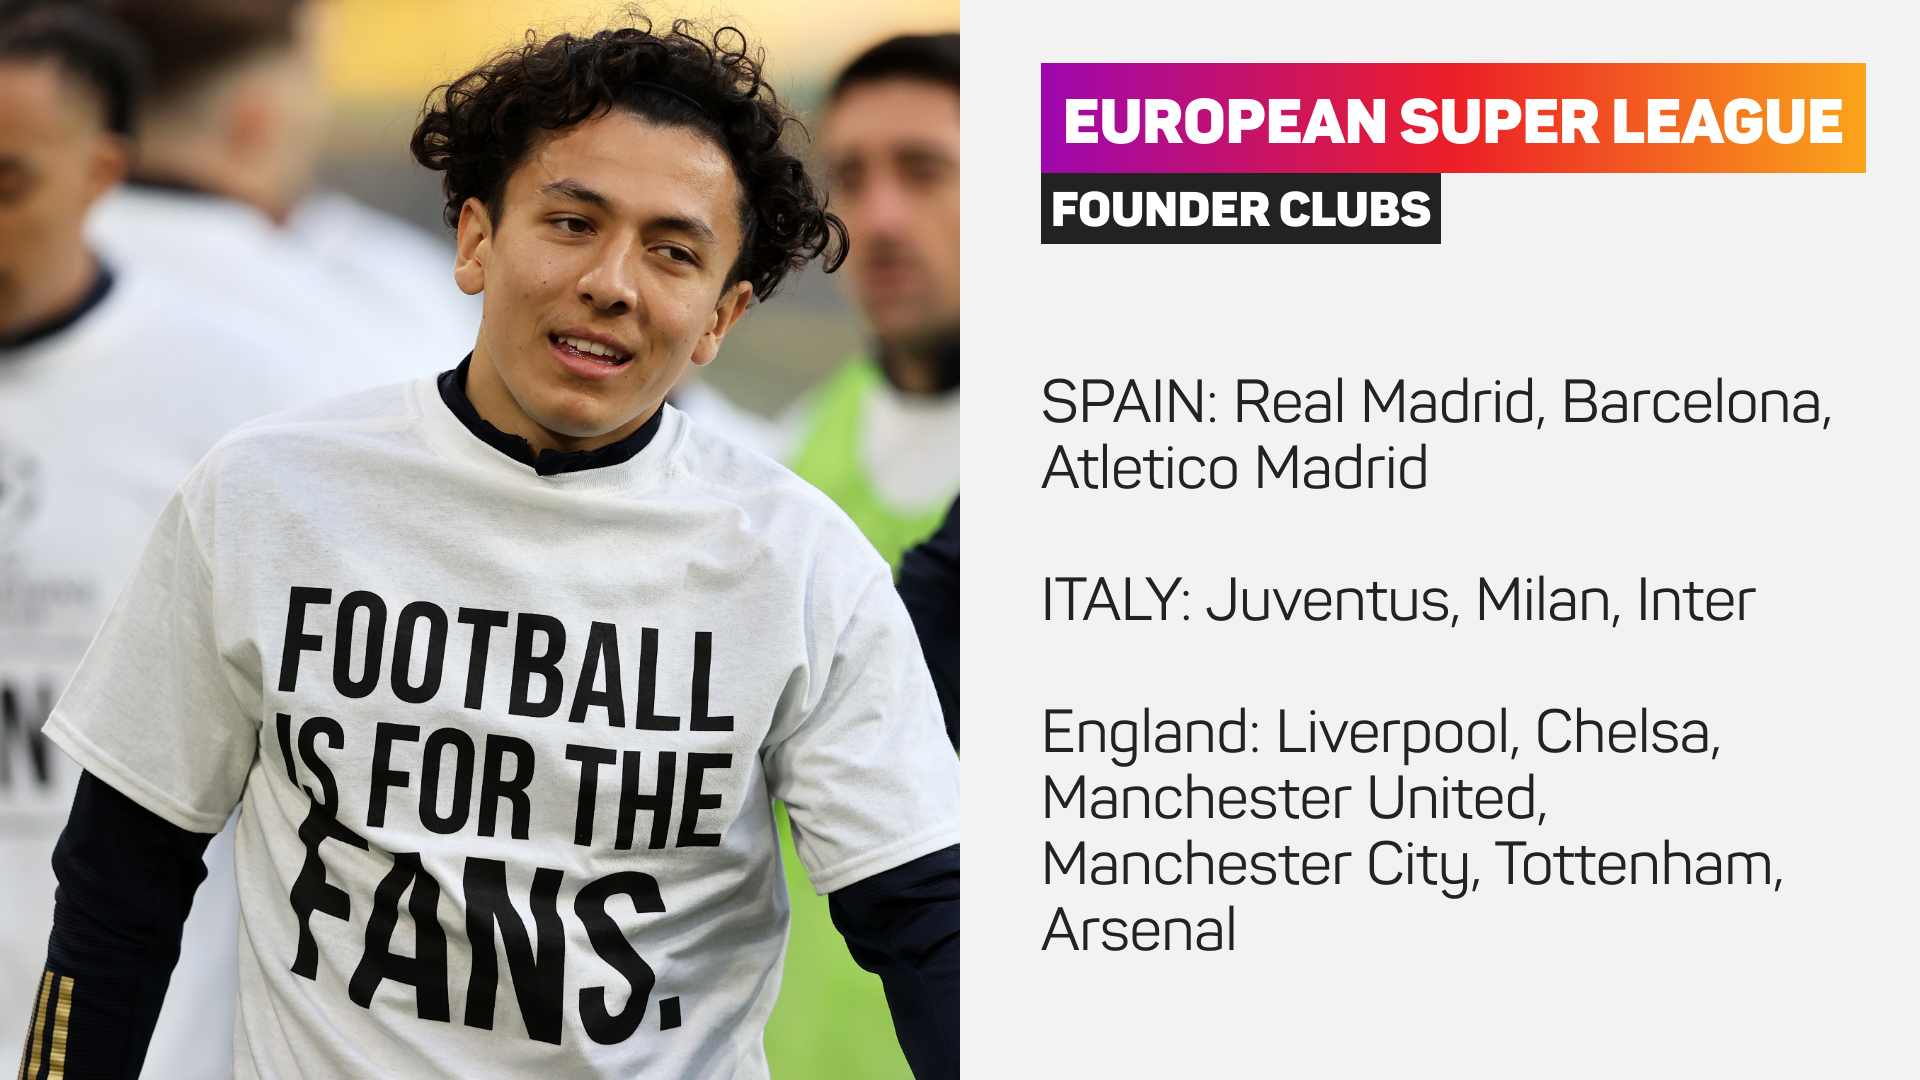 In April 2021, 12 clubs founded the European Super League